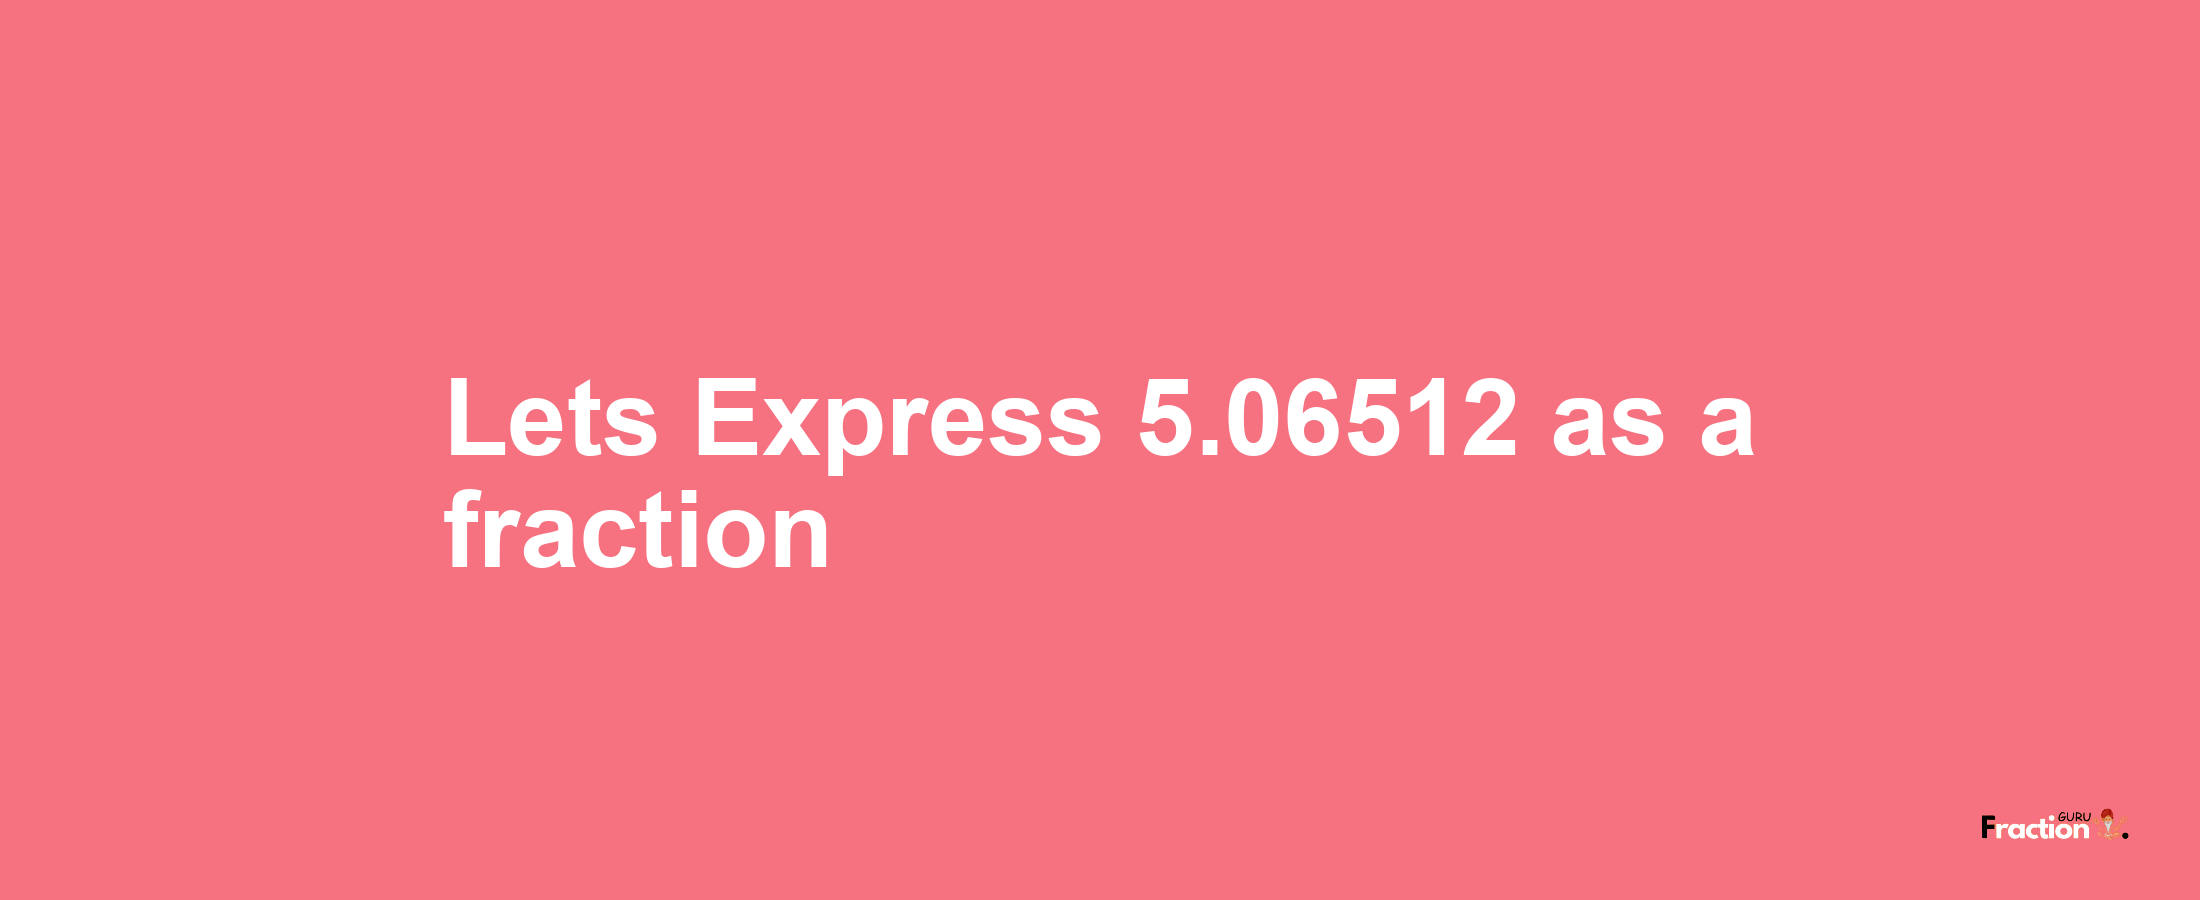 Lets Express 5.06512 as afraction